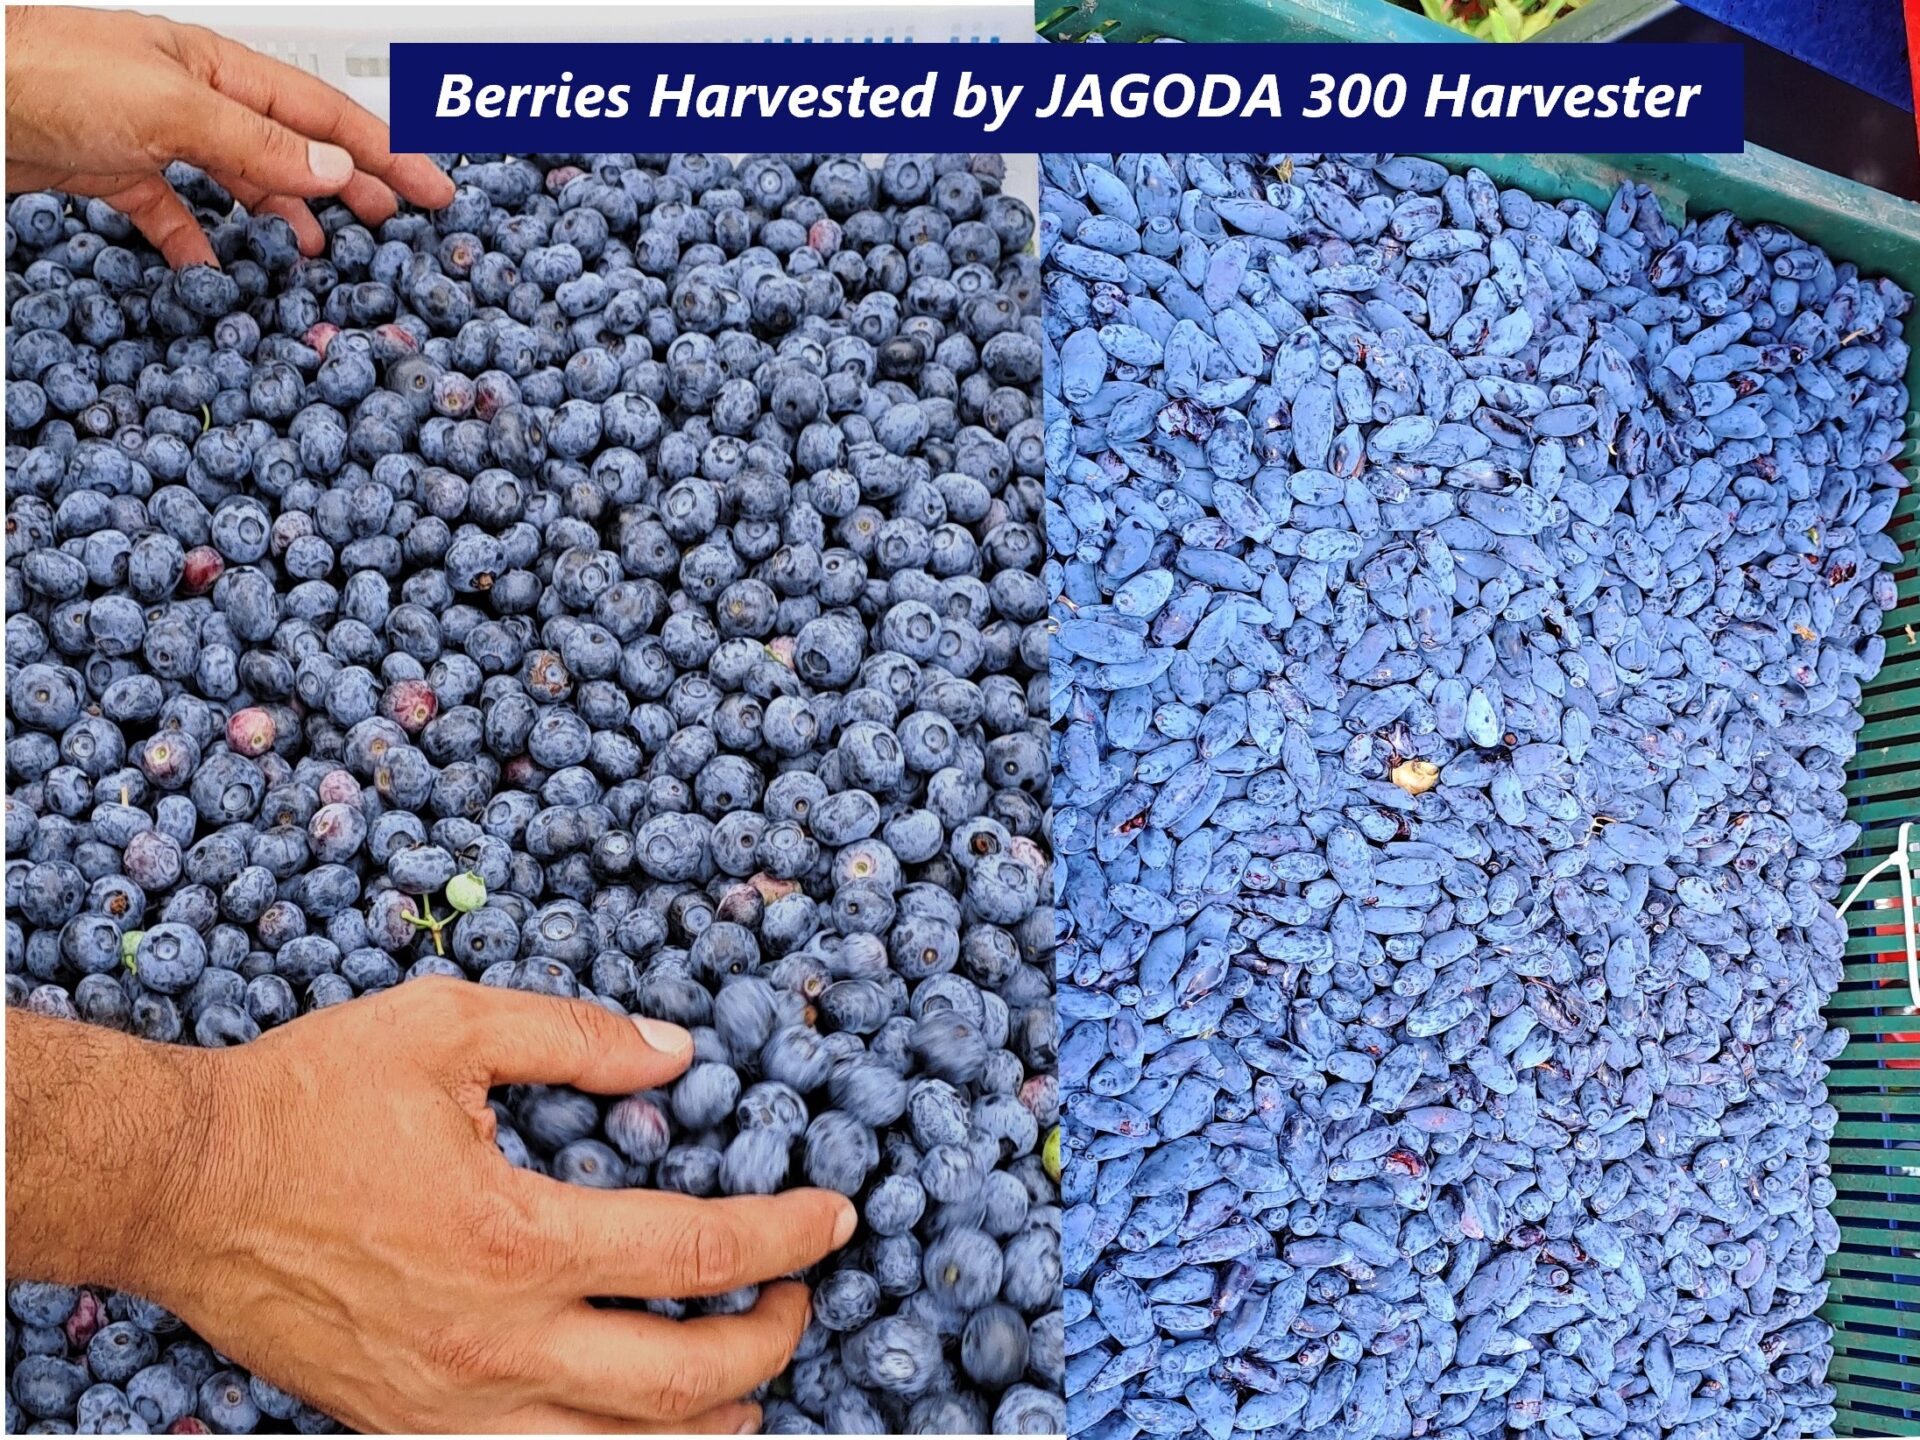 bountiful harvest of fresh blueberries collected using the JAGODA 300 Blueberry Harvesting machine